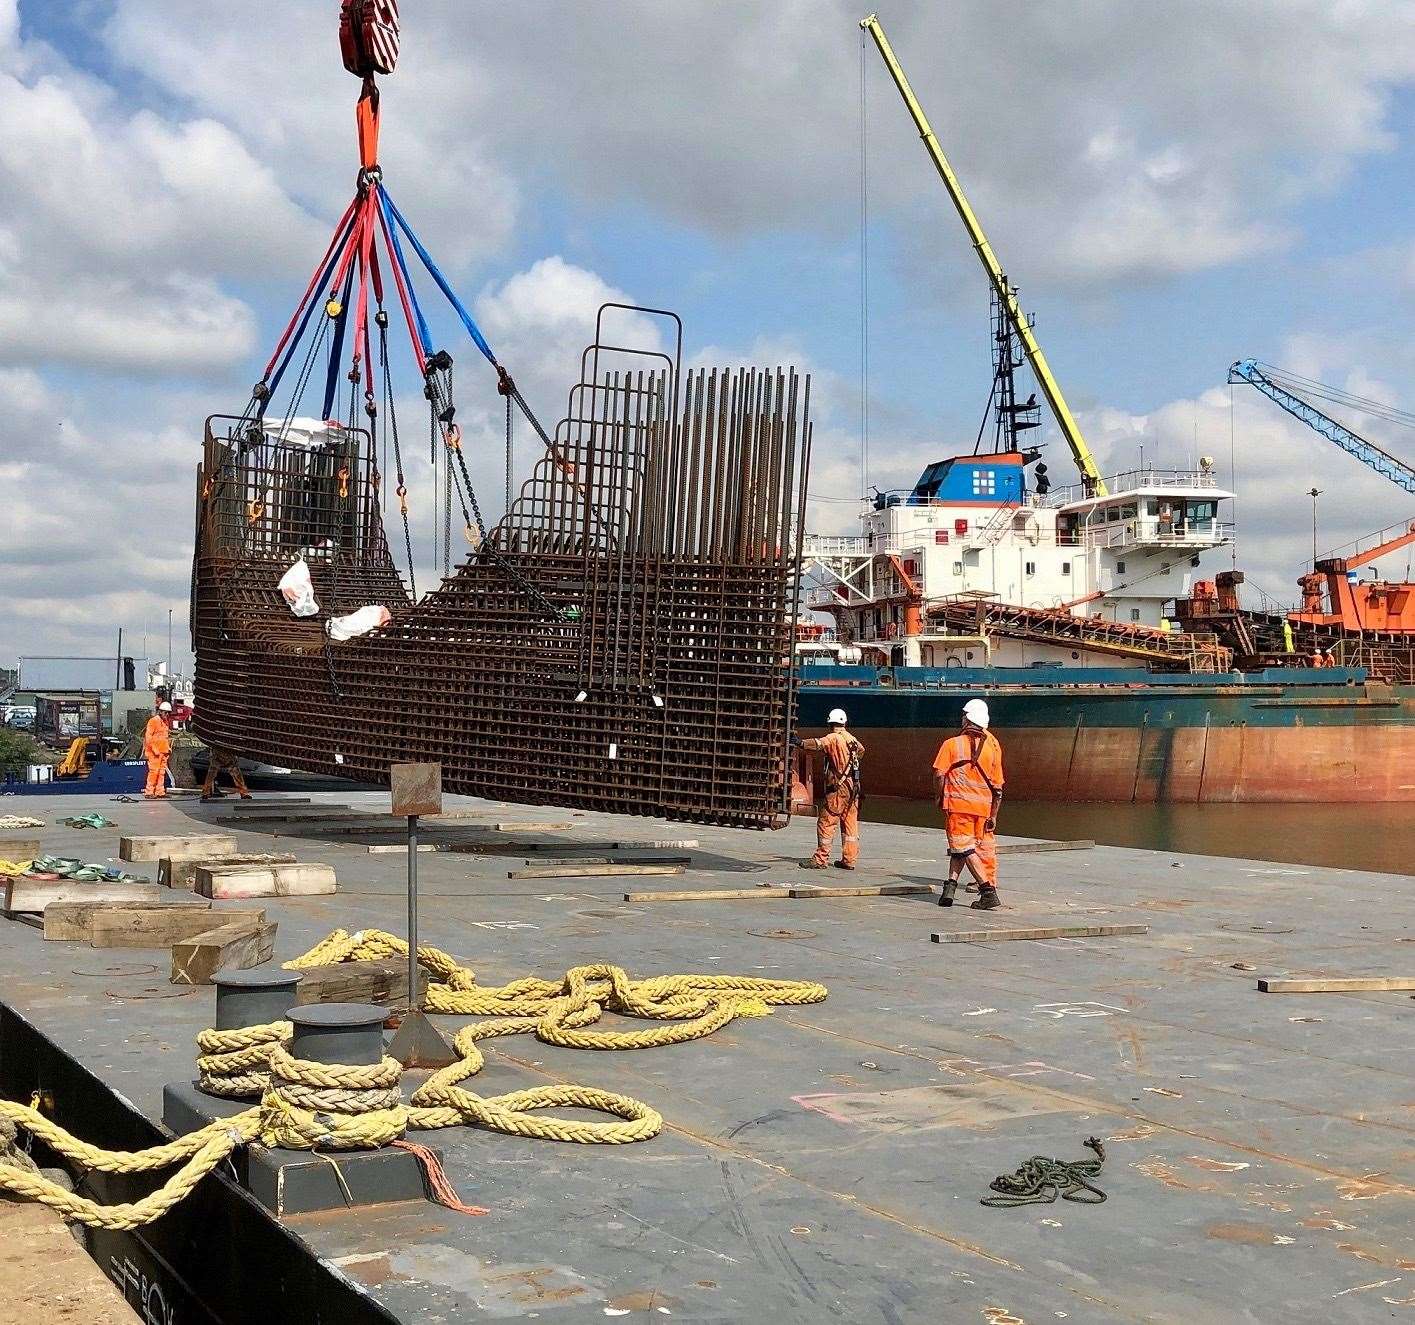 Chatham Docks employs about 800 people and businesses based there have a turnover of about £170m. Picture: Association of Chatham Docks Commerical Operators